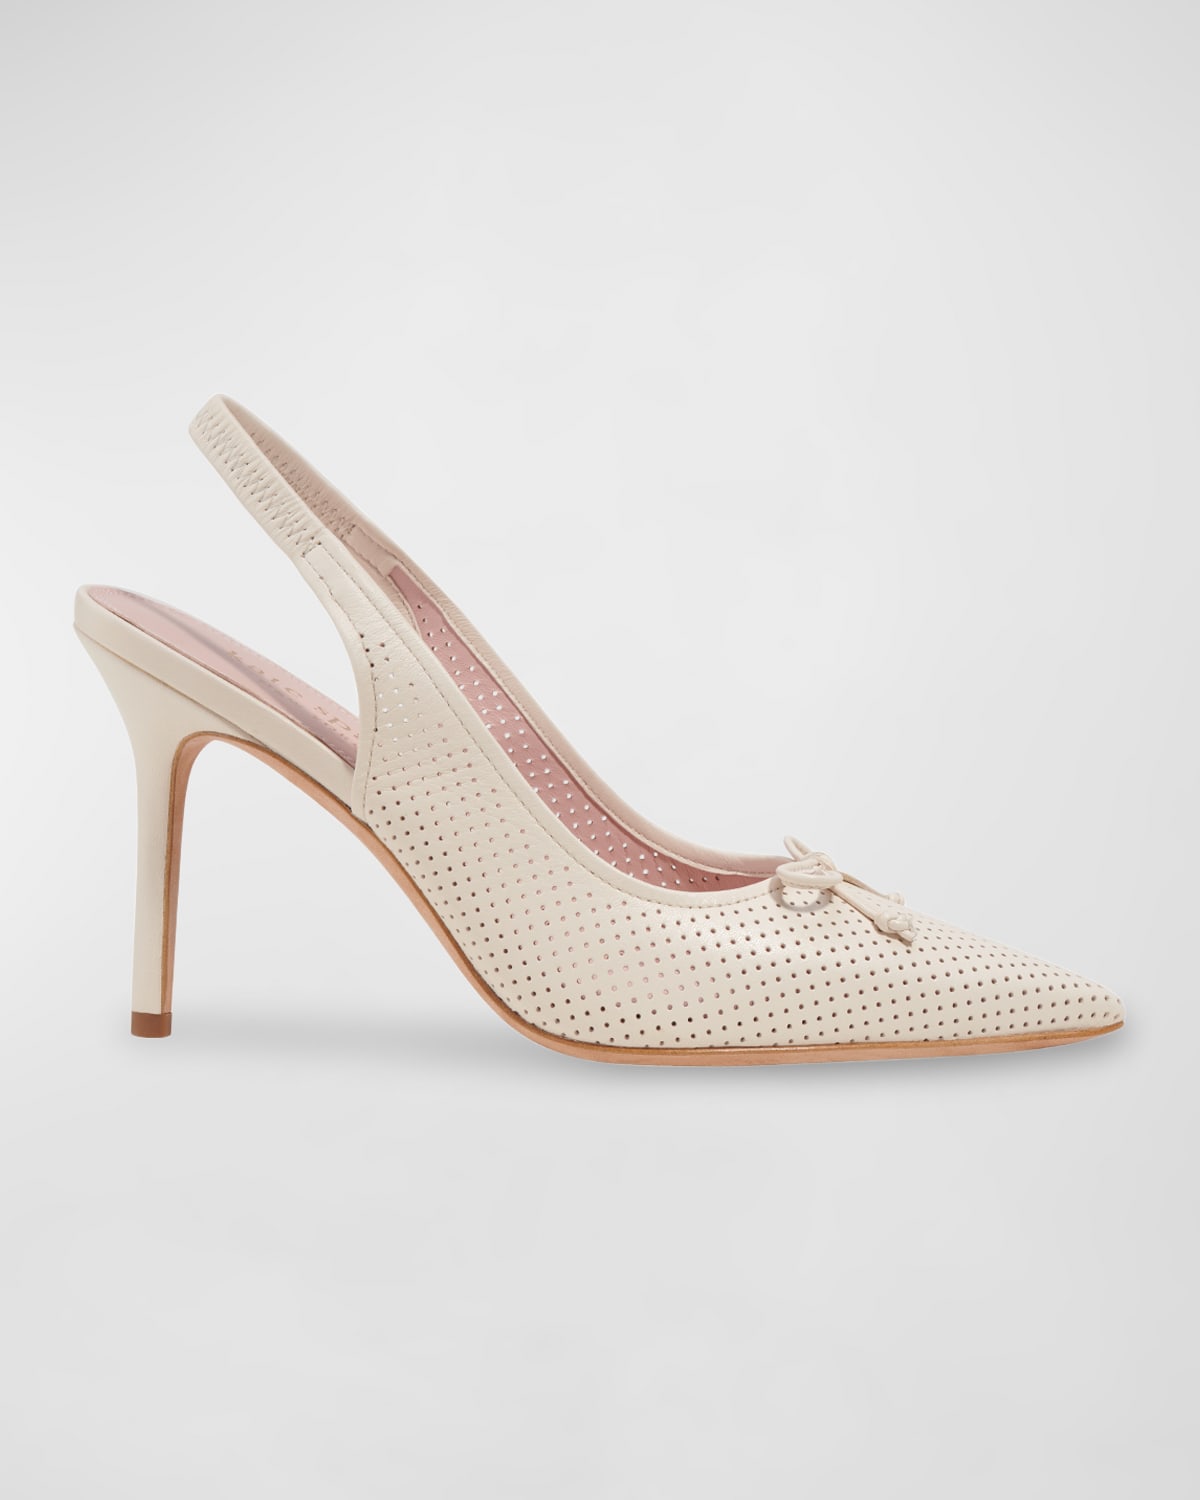 veronica perforated slingback pumps